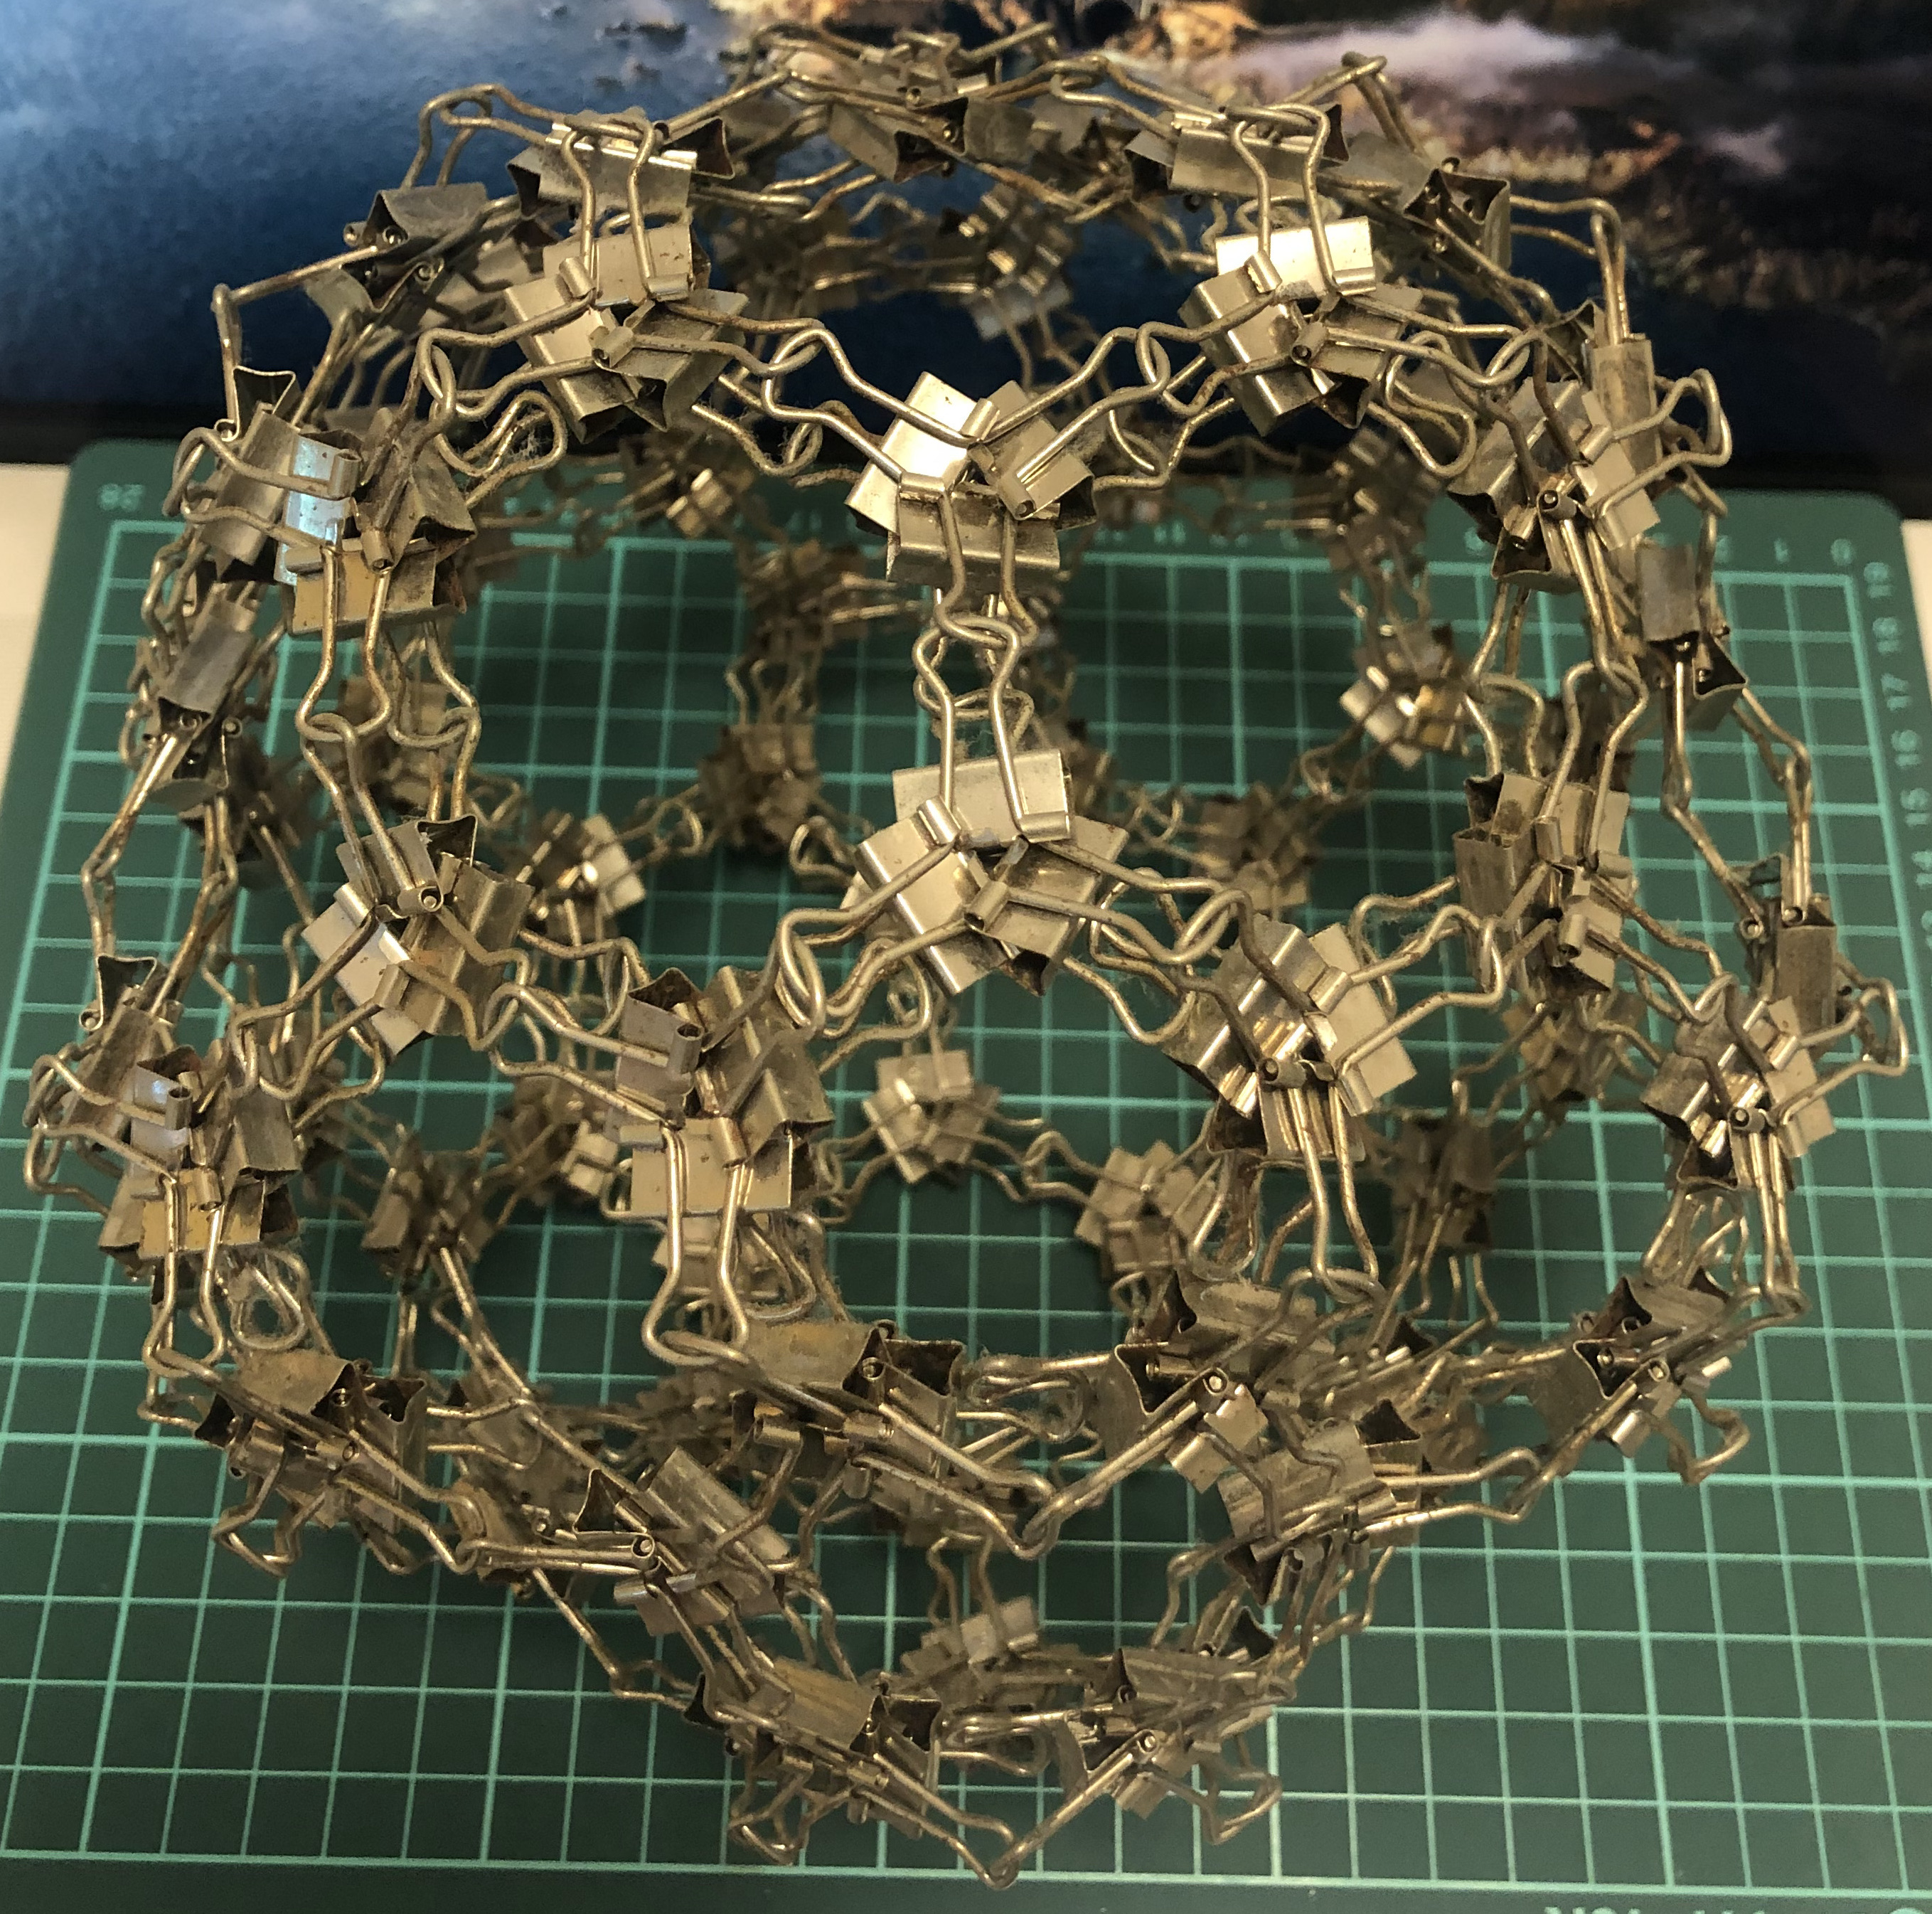 240 clips forming 60 W-edges forming chamfered dodecahedron